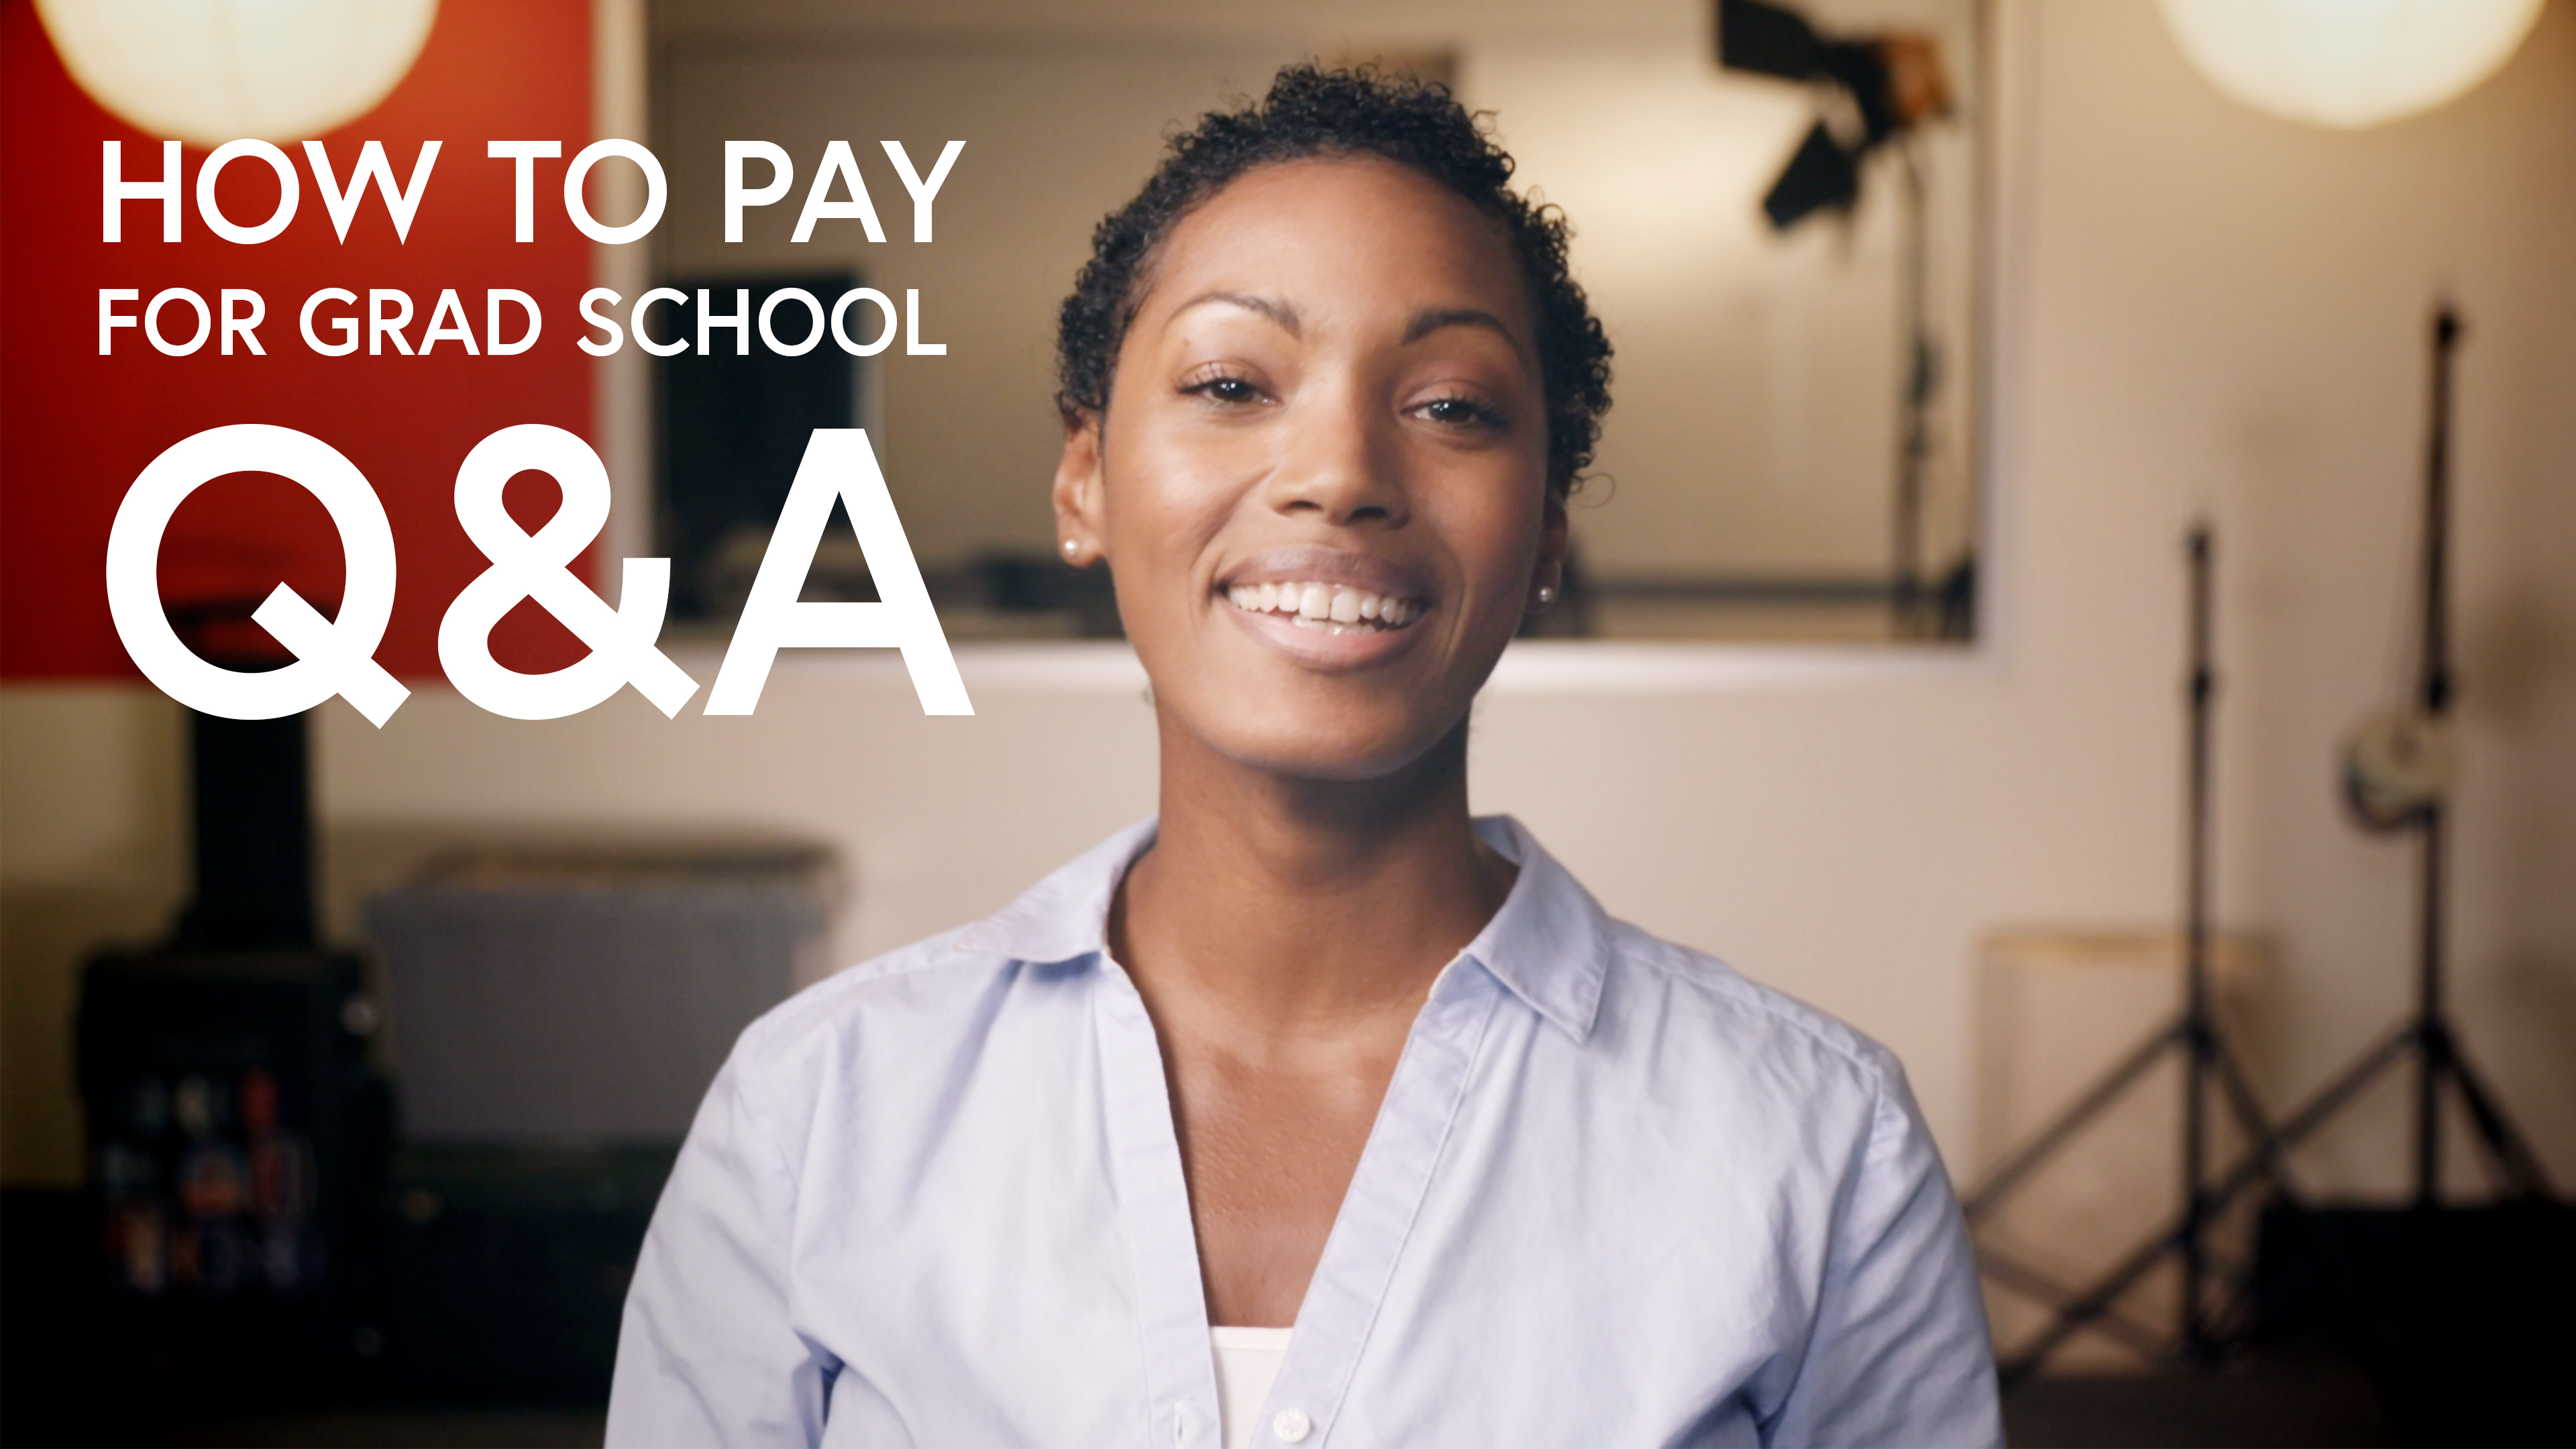 How to pay for grad school Q&A